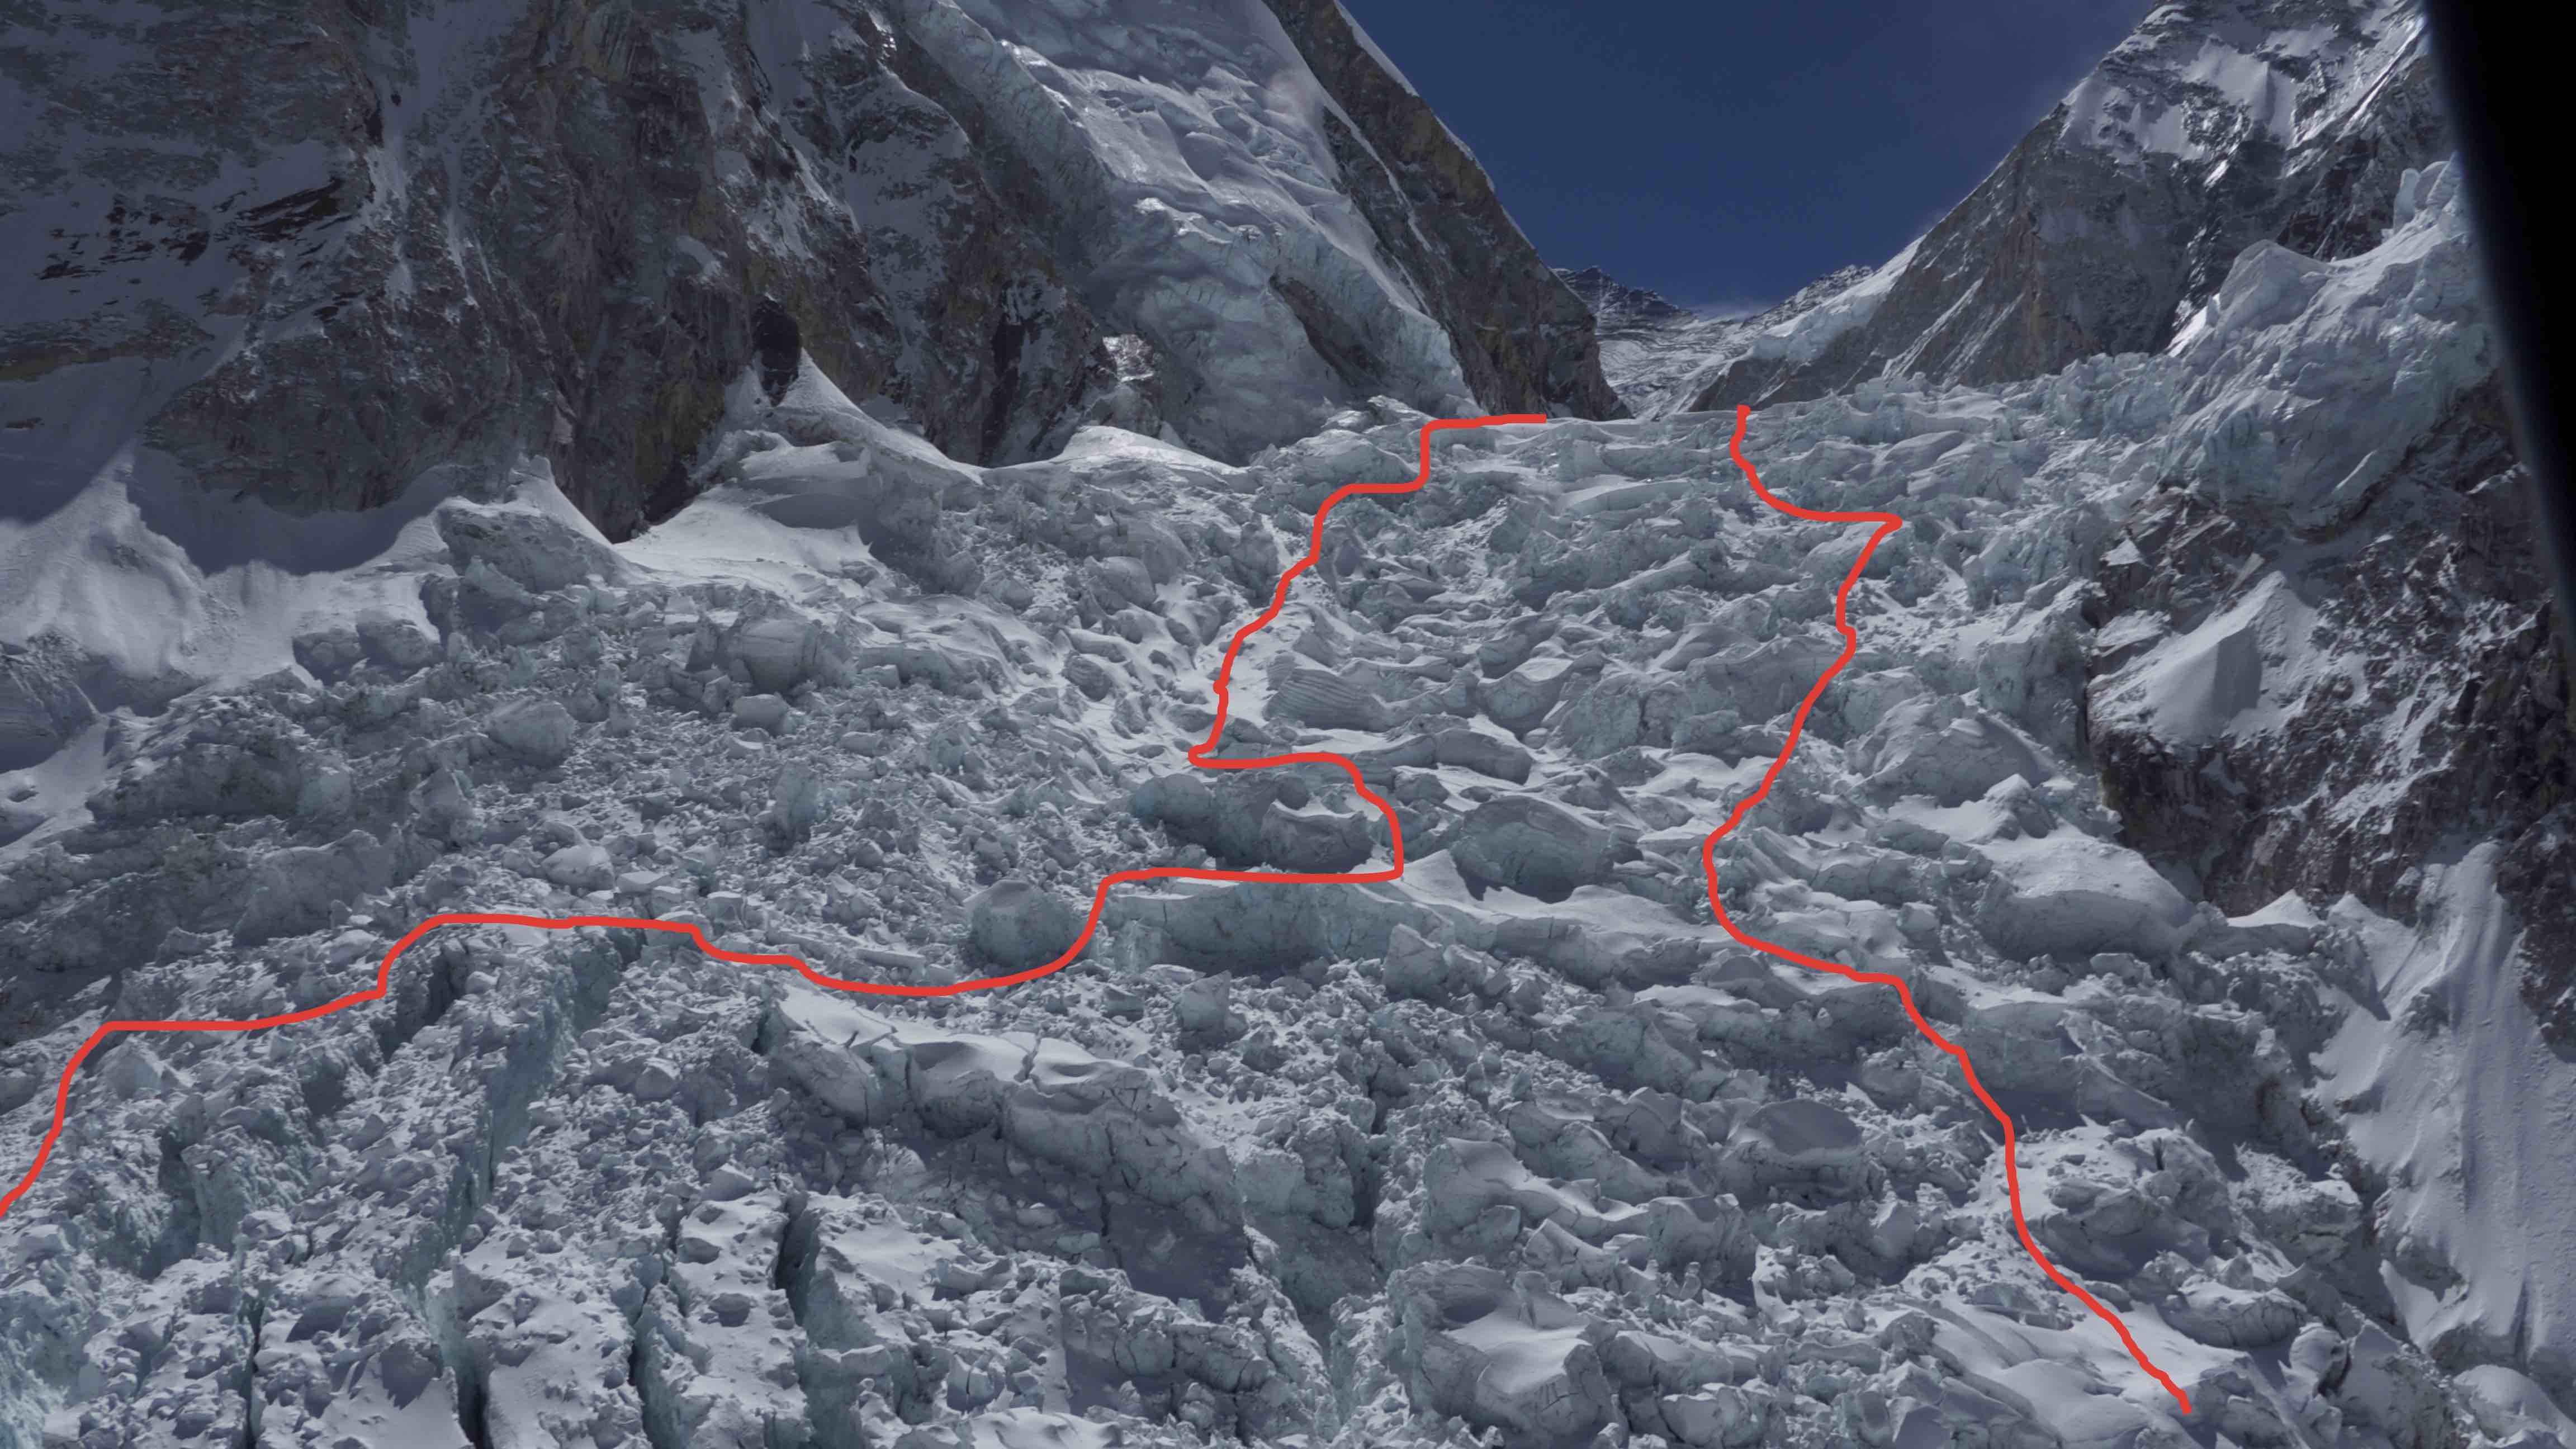 Everest 2017: Why is the Khumbu Icefall so Dangerous? | The Blog on ...